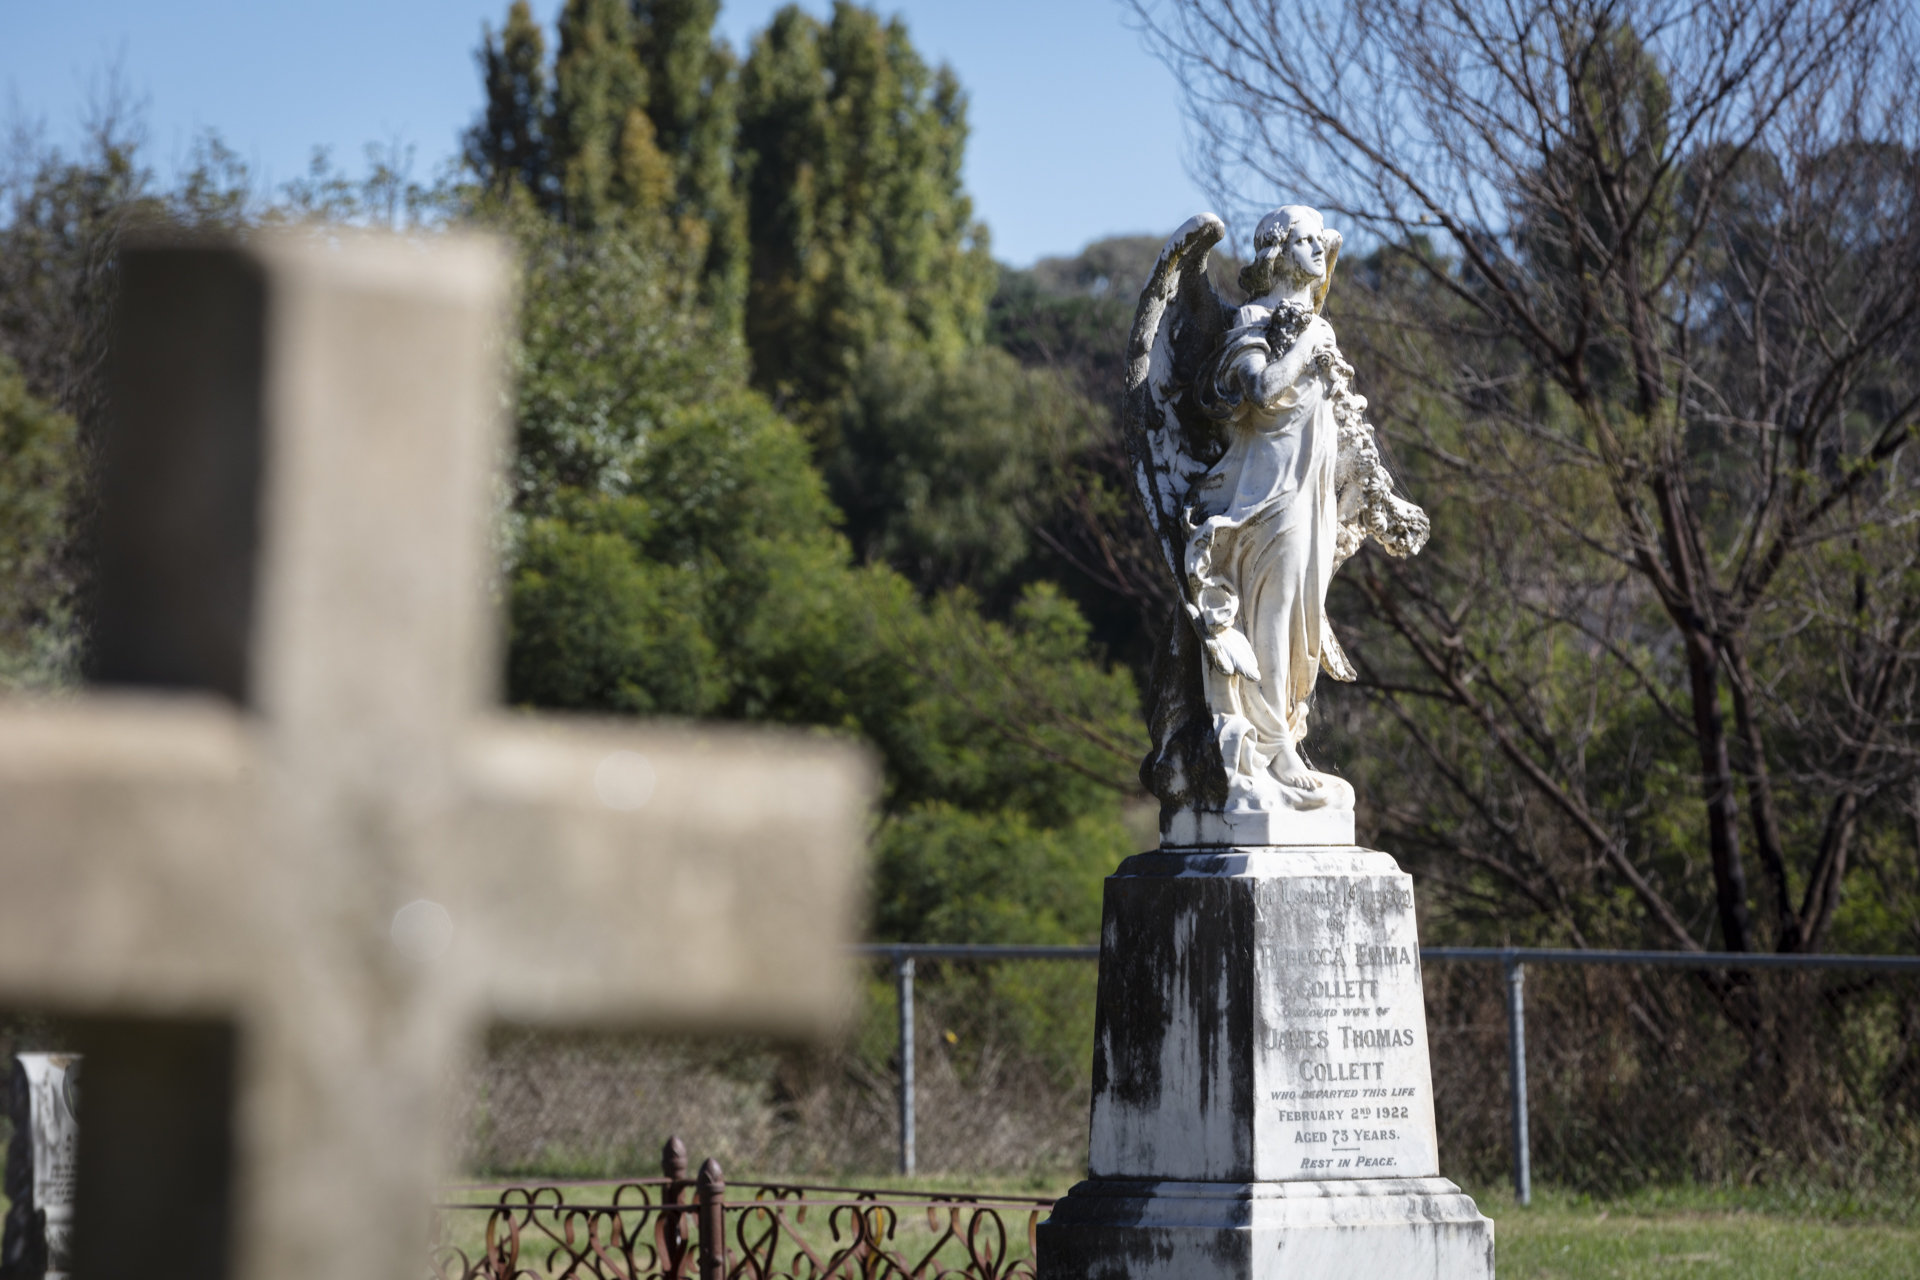 Headstone stories to be told in this year's Queanbeyan Heritage Festival